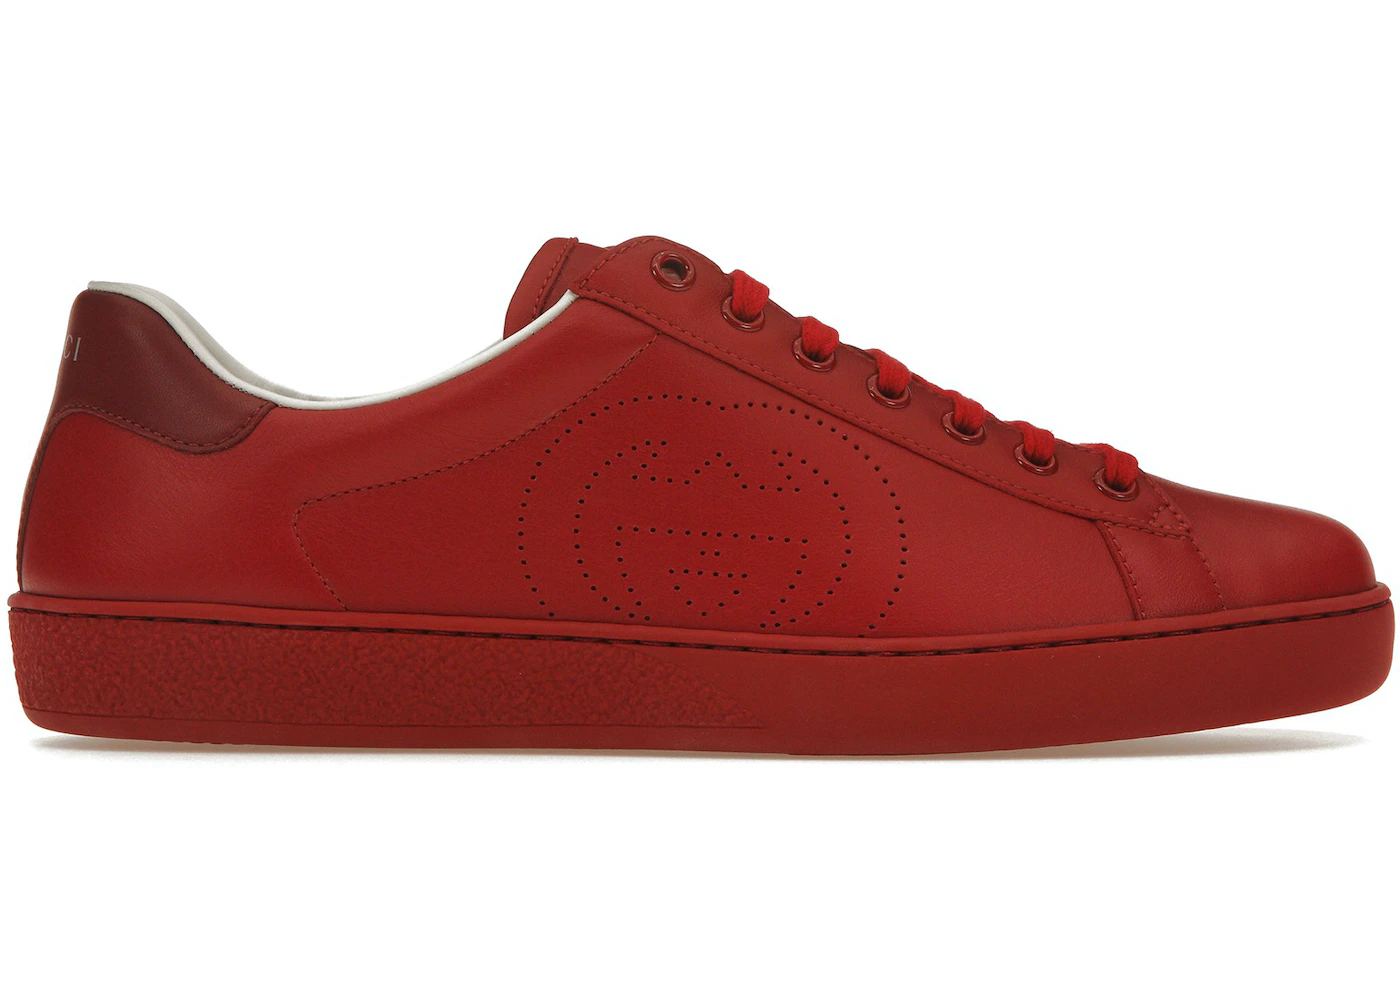 Gucci Ace Perforated Interlocking G Red Men's - _599147 AYO70 6463 - US